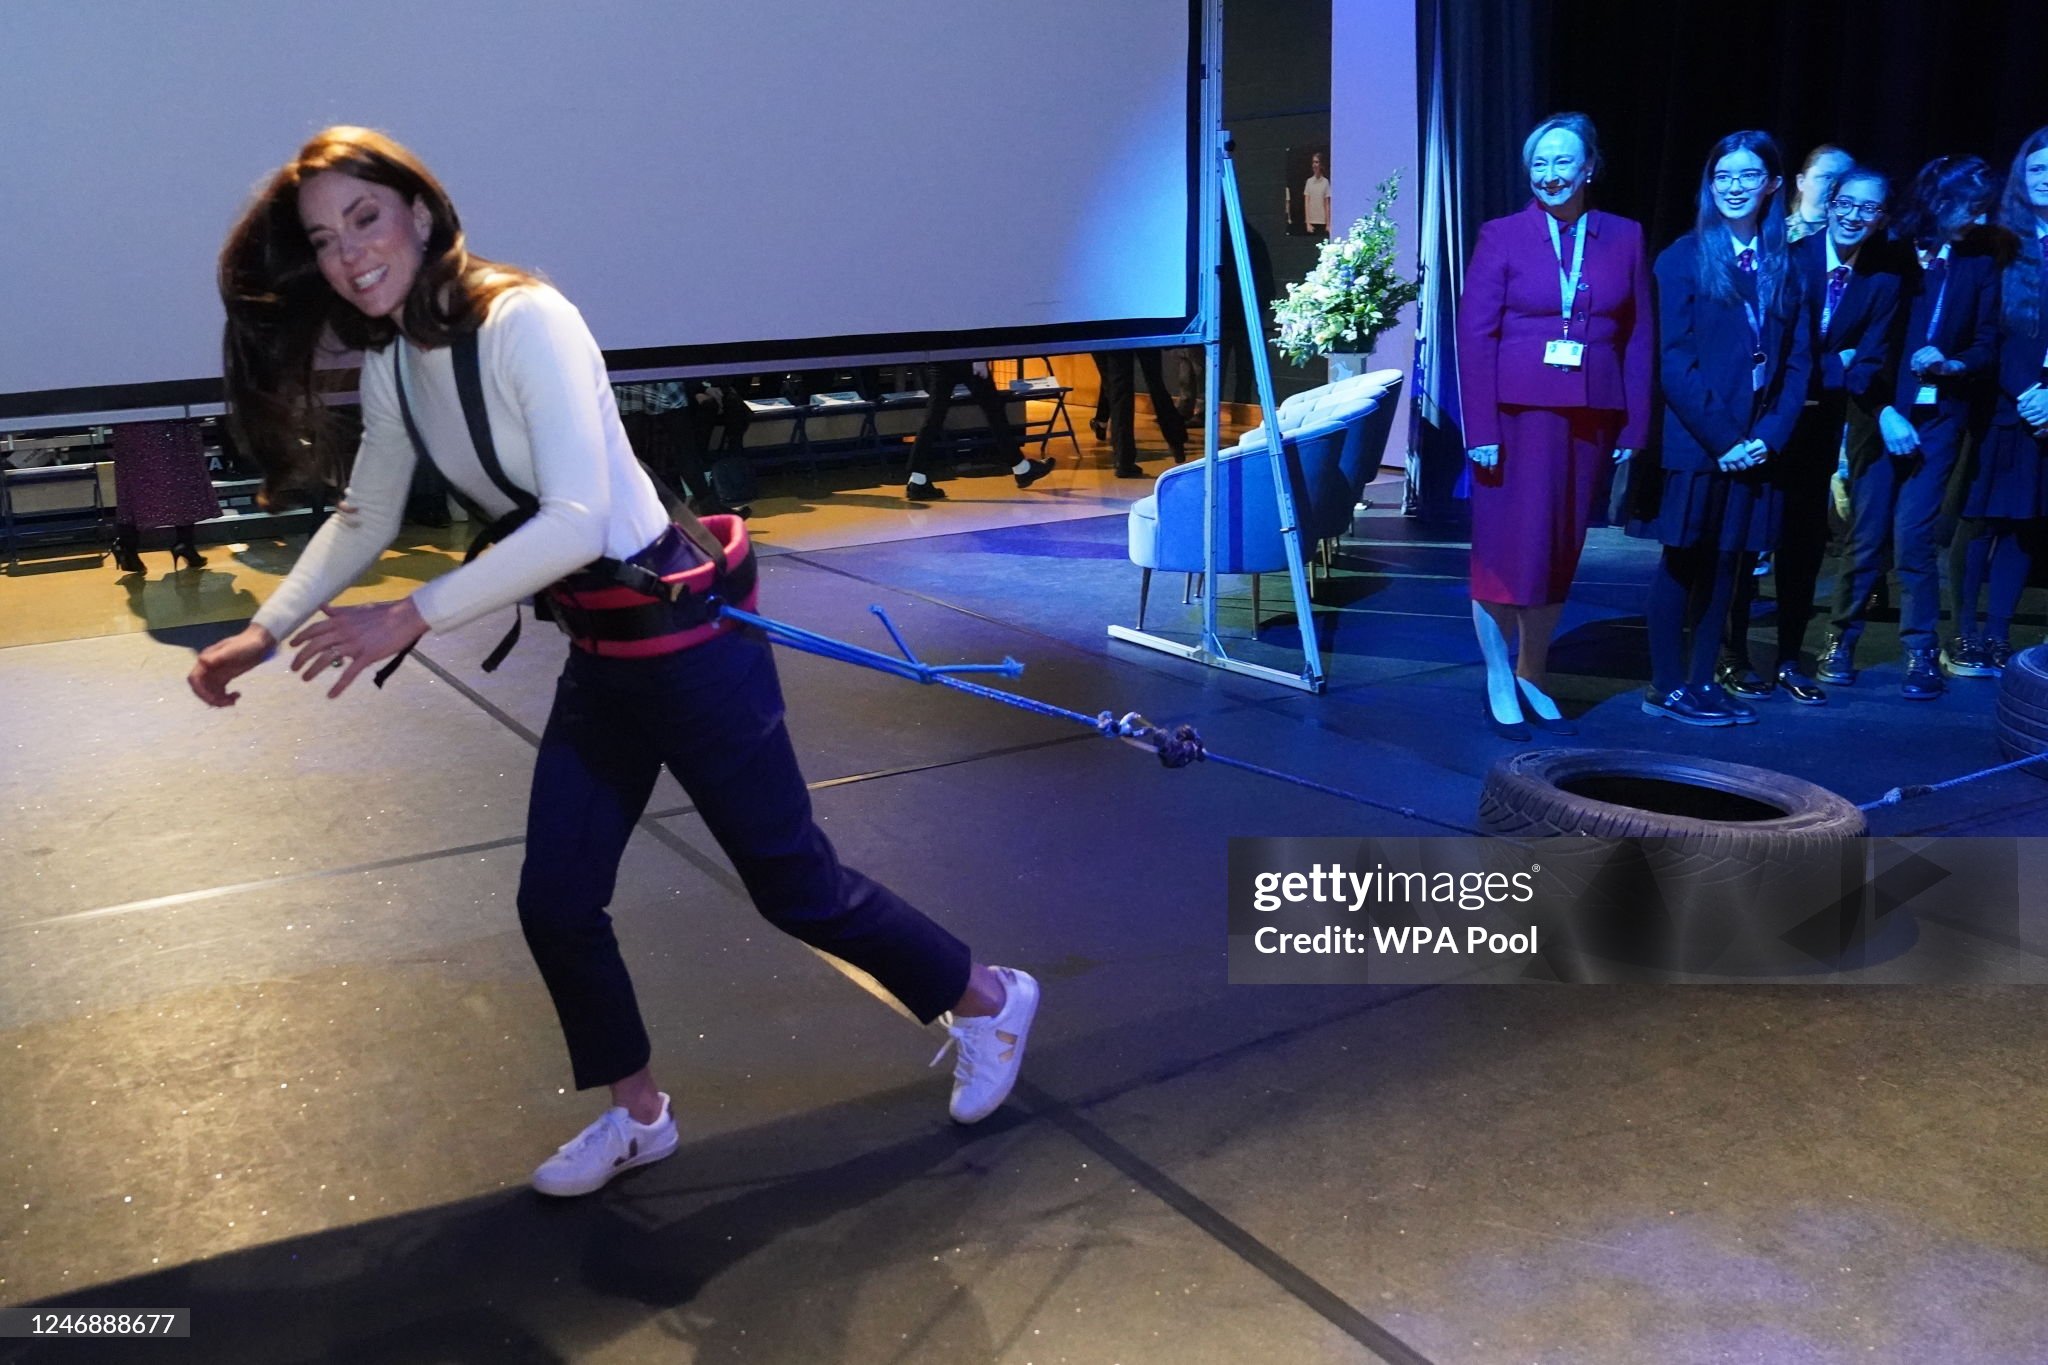 catherine-princess-of-wales-tries-a-strength-training-exercise-during-a-visit-to-landau-forte.jpg